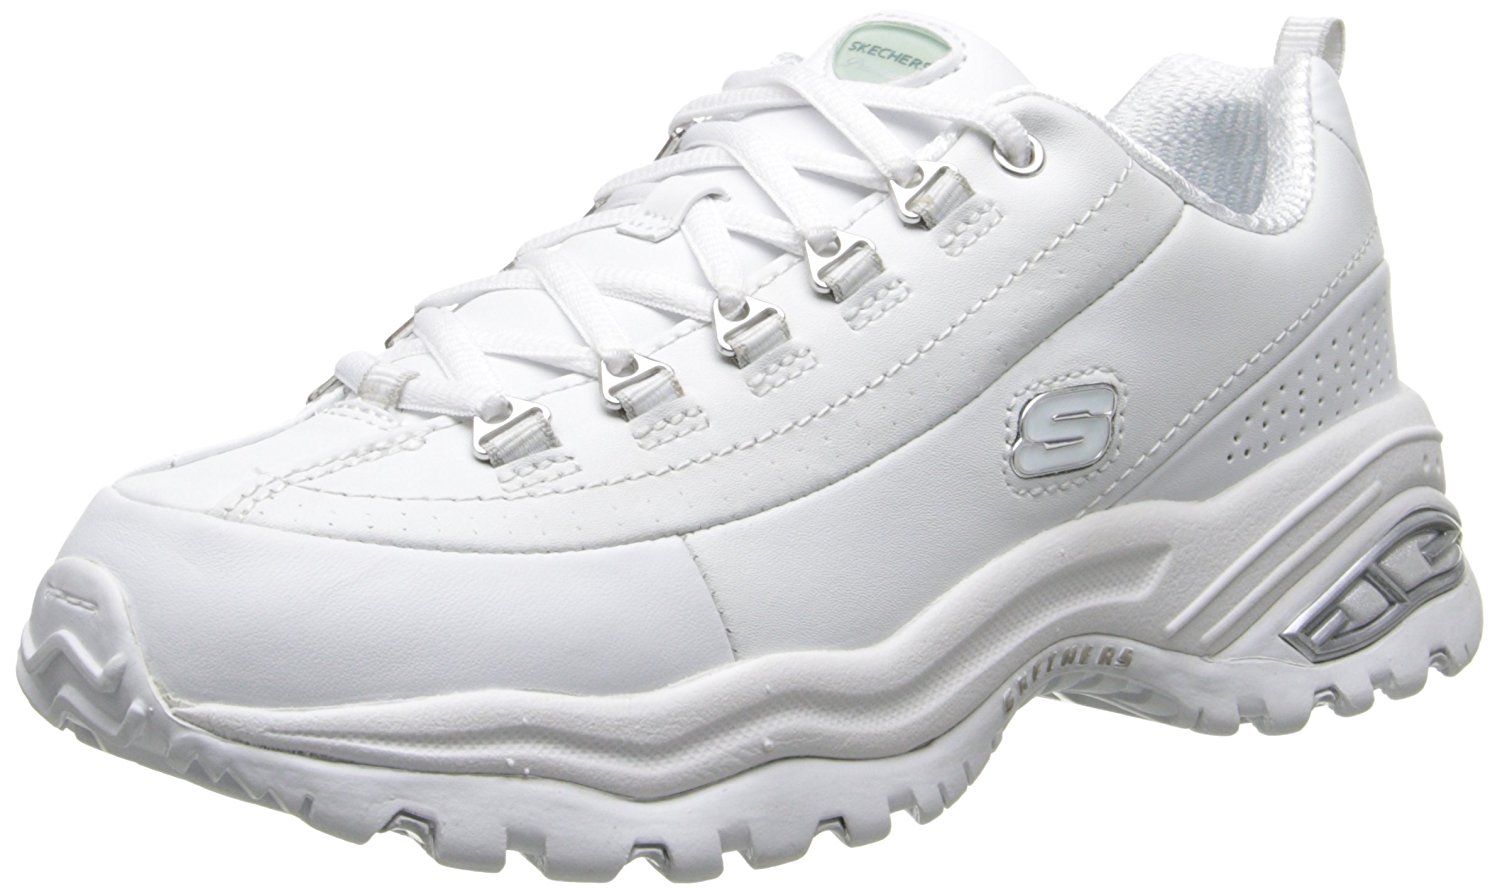 Skechers Womens 1728wnv Low Top Lace Up Walking Shoes, White, Size 10.0 ...